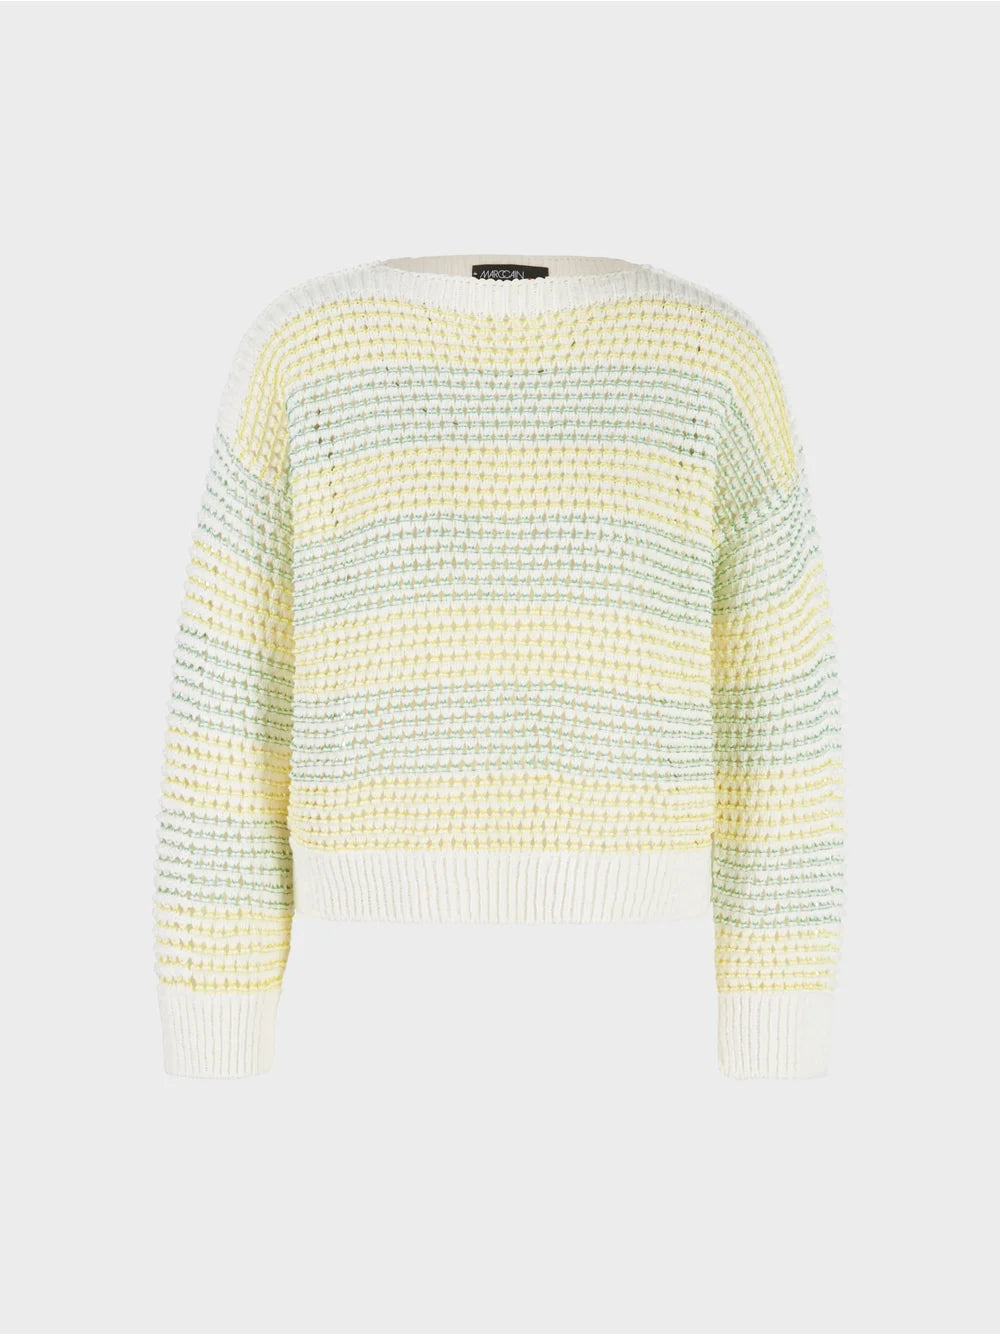 Marc Cain Striped Sweater knitted in Germany